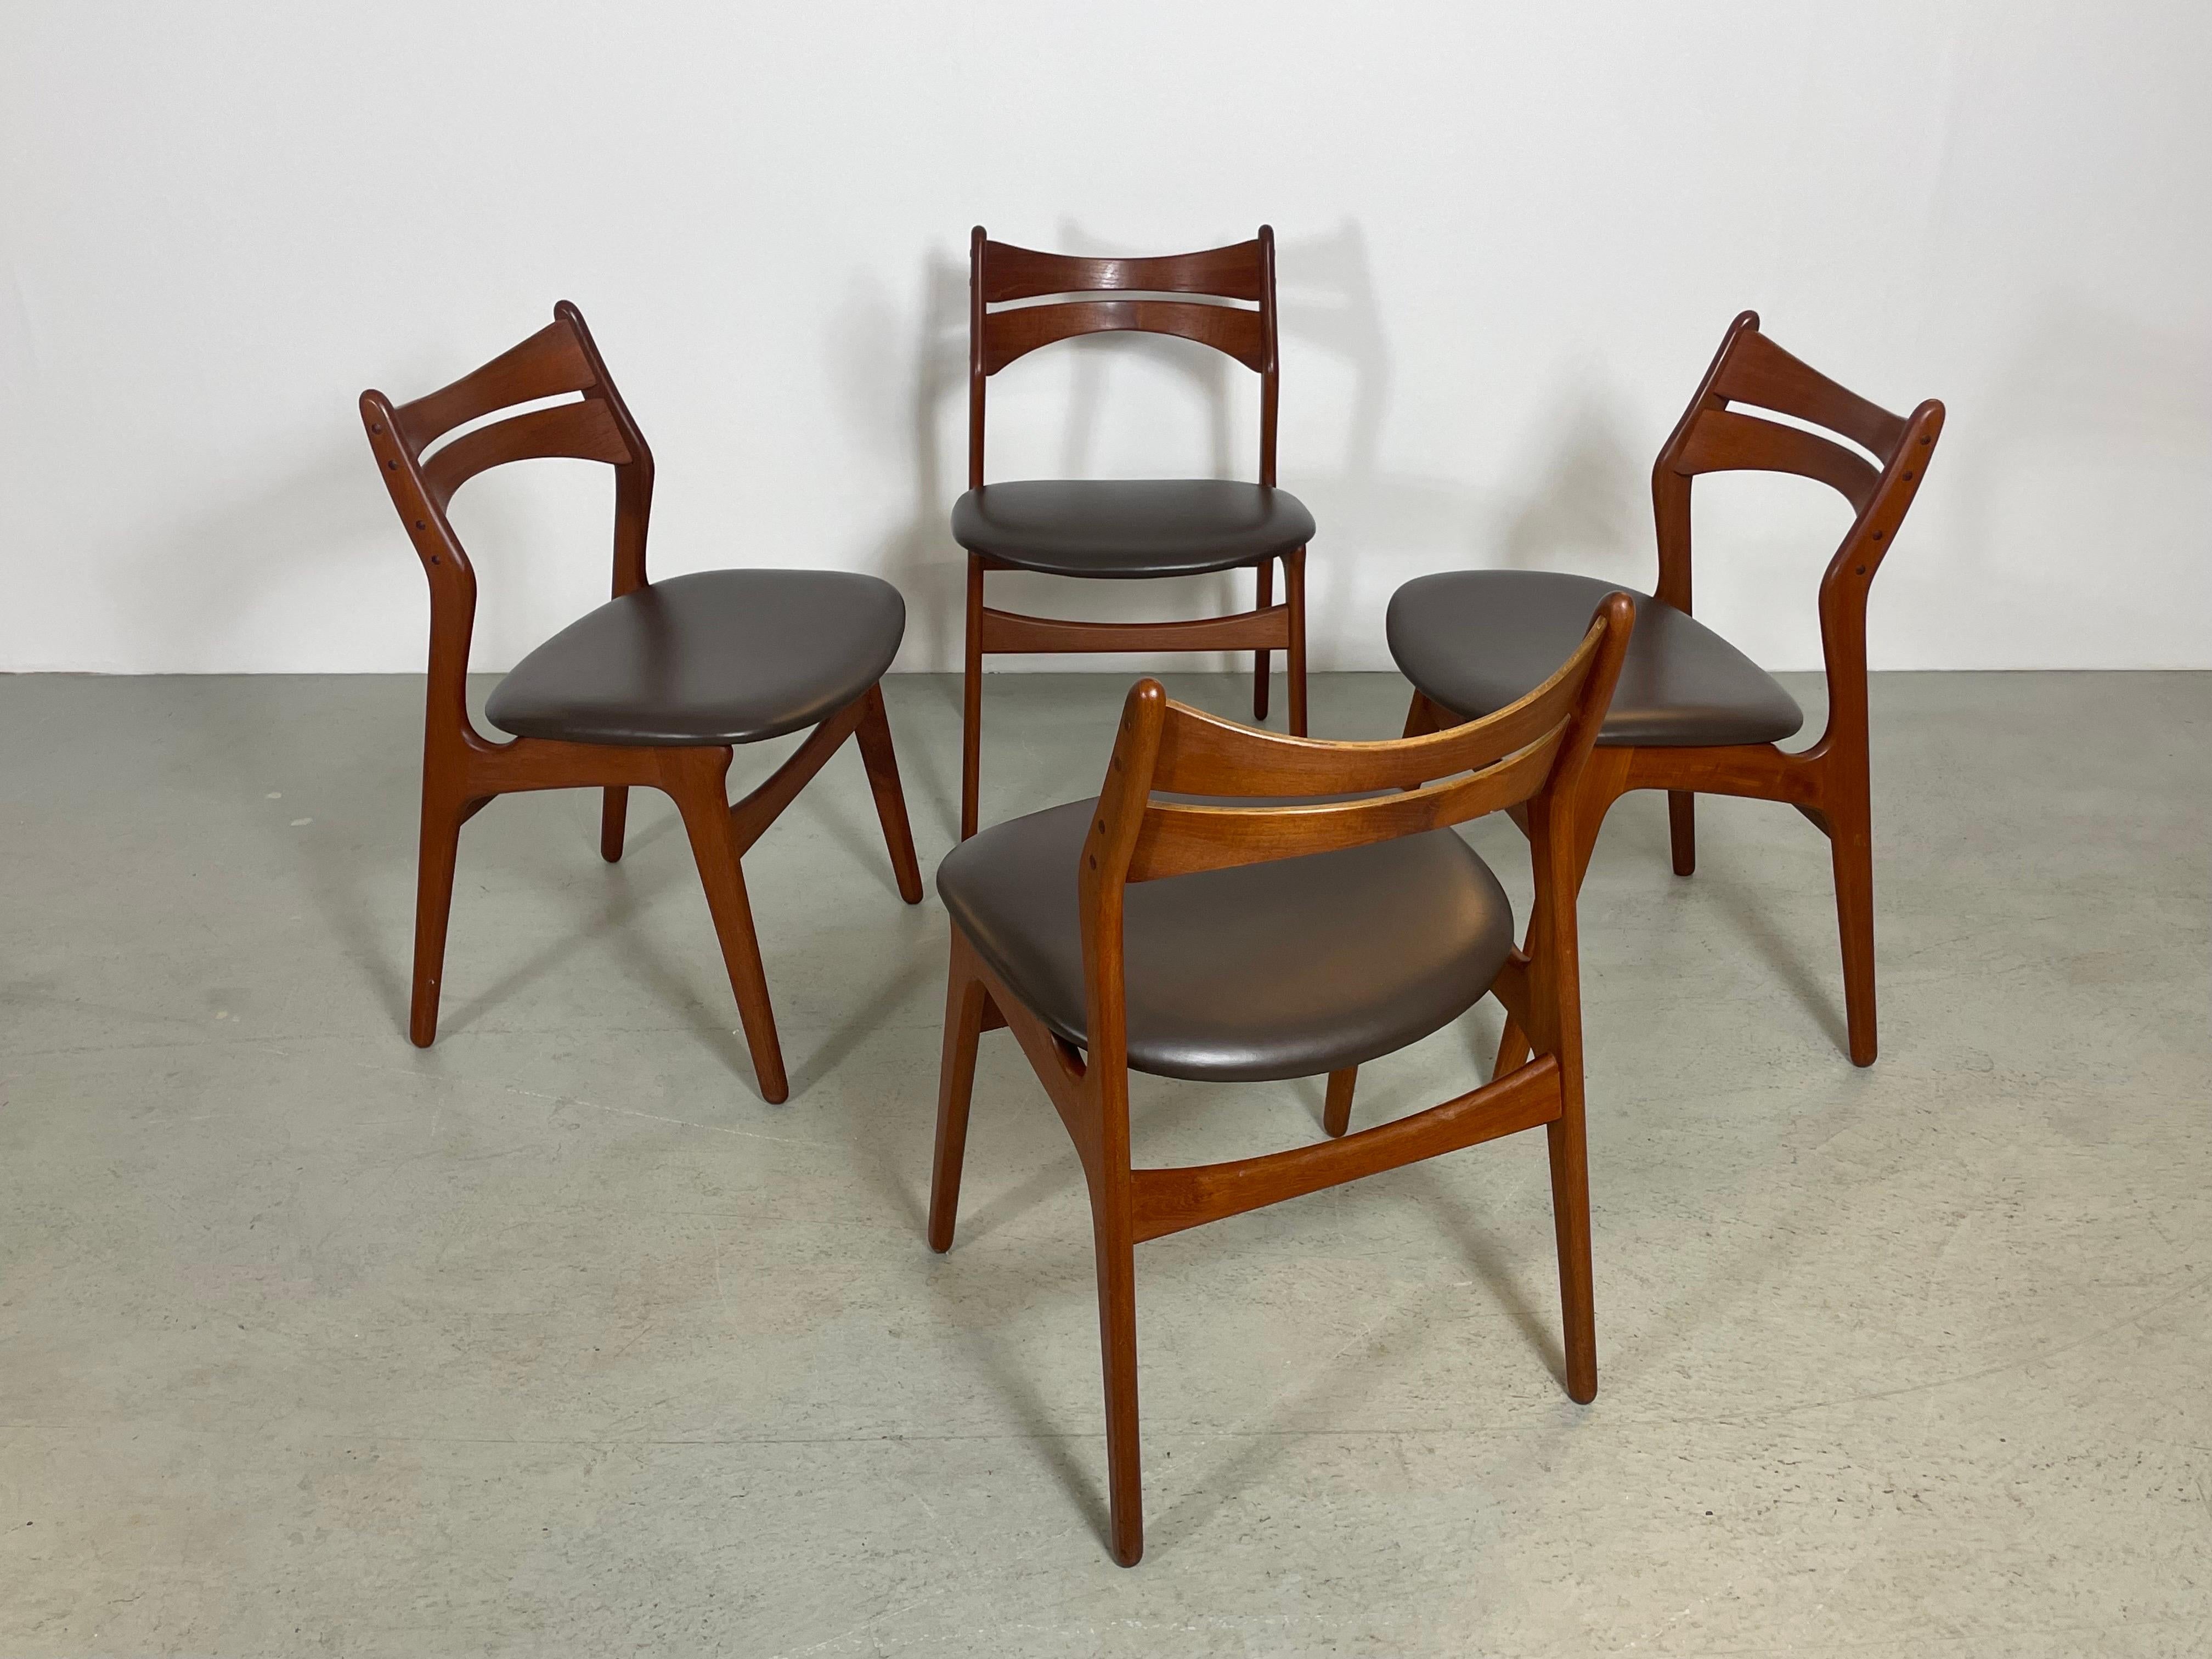 A set of four of mid-century dining chairs by Danish Designer Erik Buch. Made in Denmark during the 1950s by O.D. Mobler. This is a true design classic which features a sturdy wooden frame with organic shaped elements to create high comfort. The